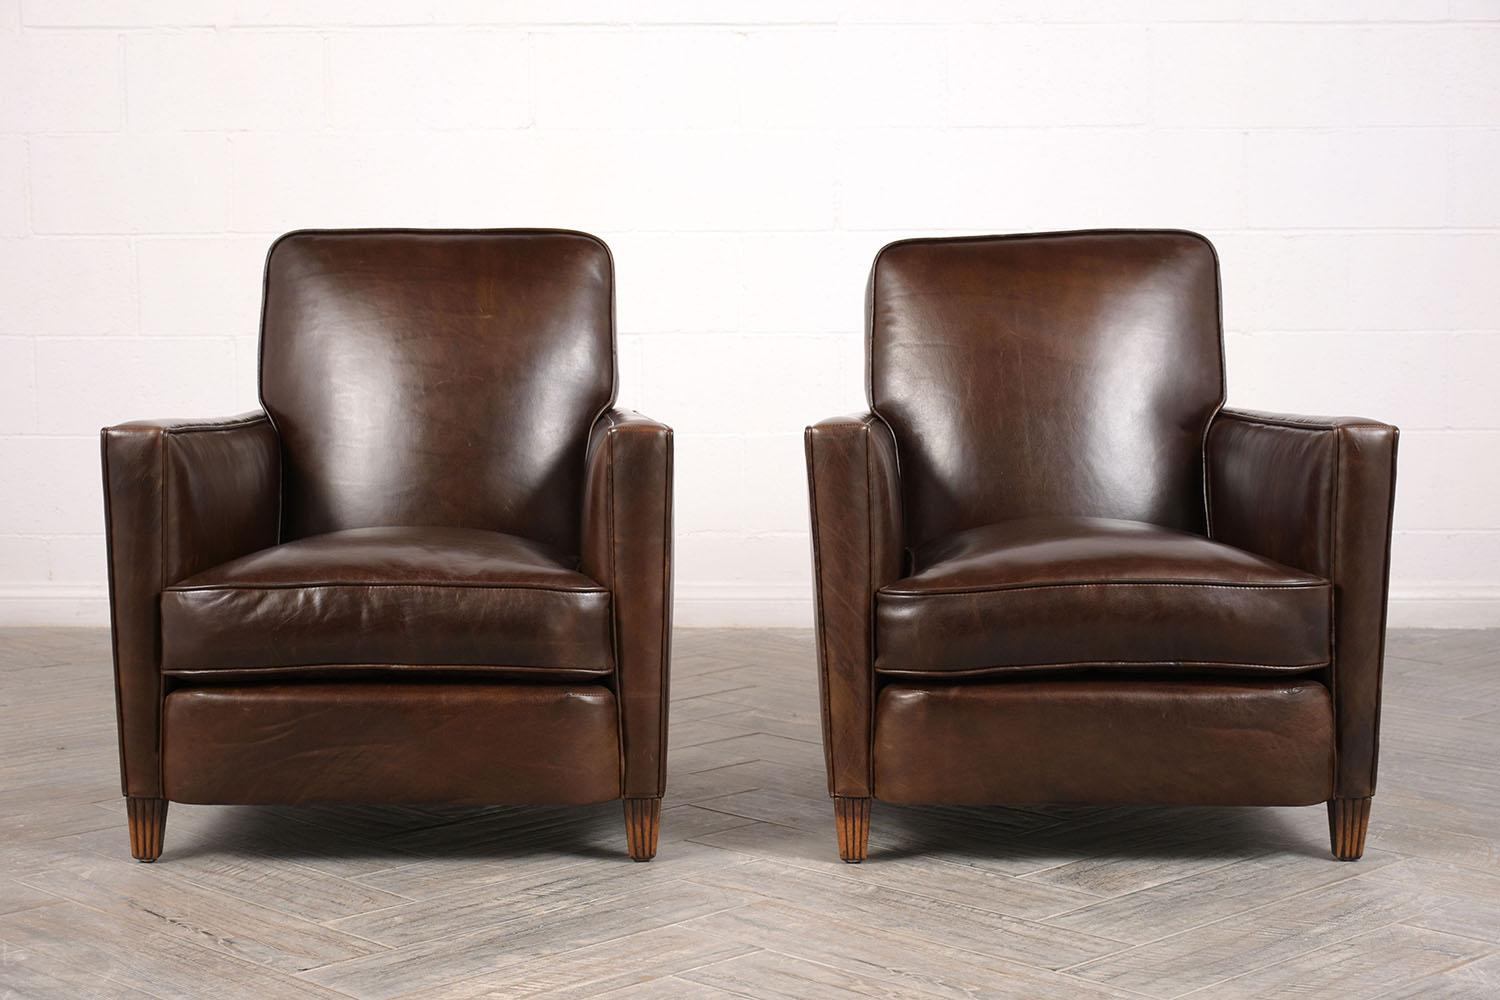 Elegant pair of 1930s Art Deco club chairs. They have been completely restored and professionally reupholstered in a dark brown leather. Has a single seat cushion with feather insert, making it very comfortable for hours on end. Also has single